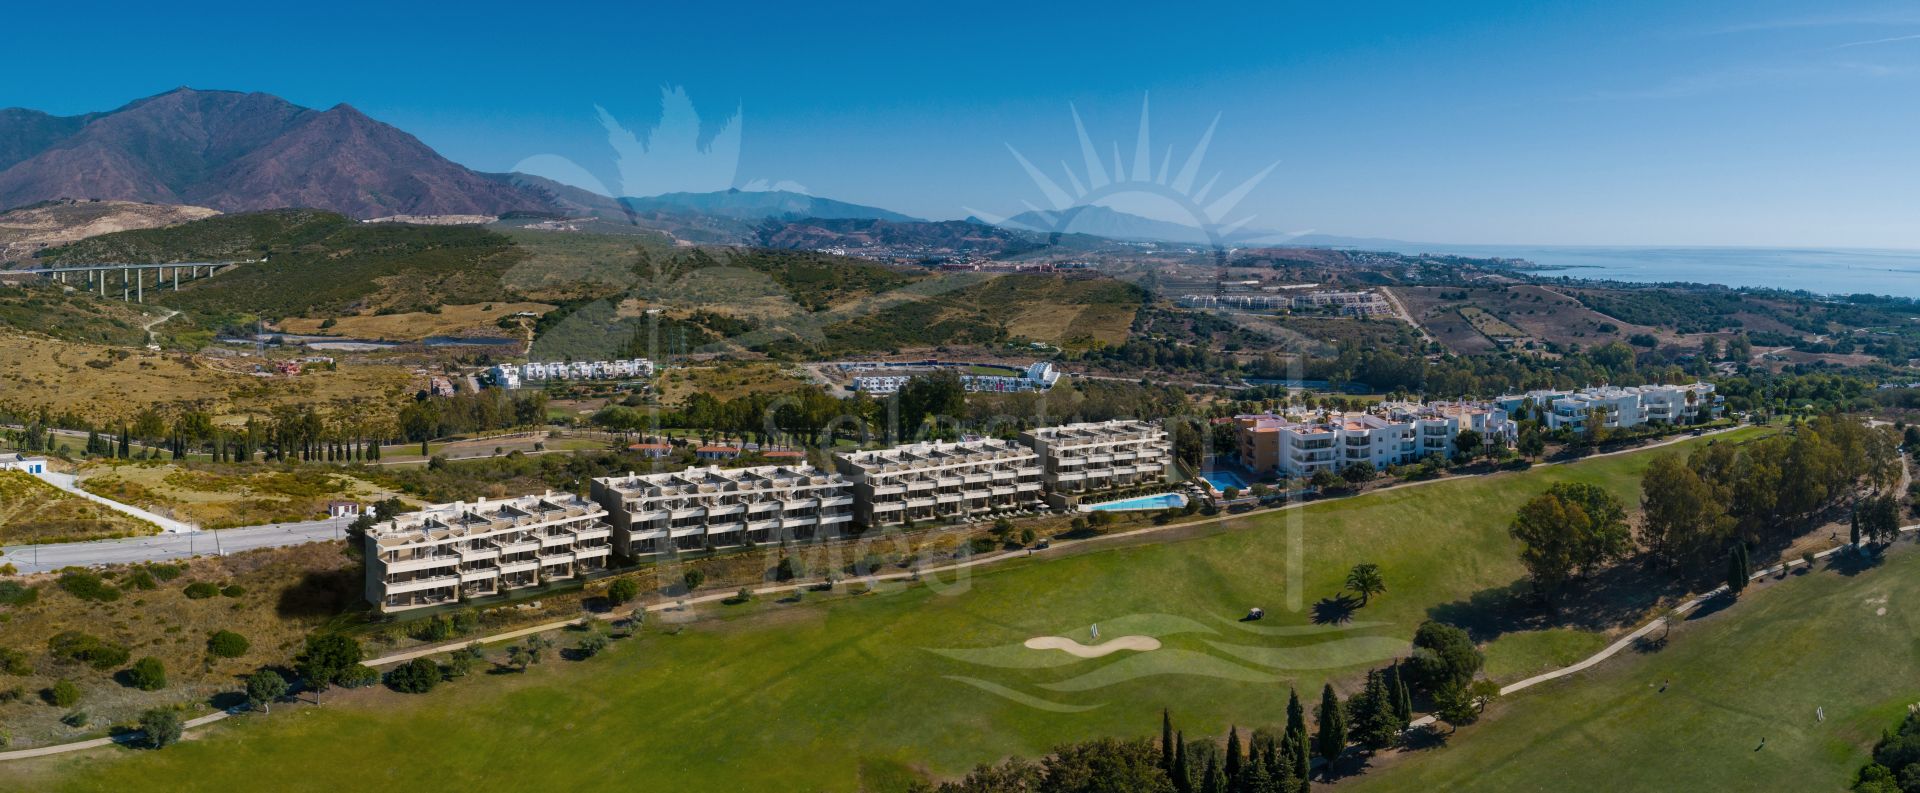 Sunny Golf, modern frontline golf apartments and penthouses in Estepona.